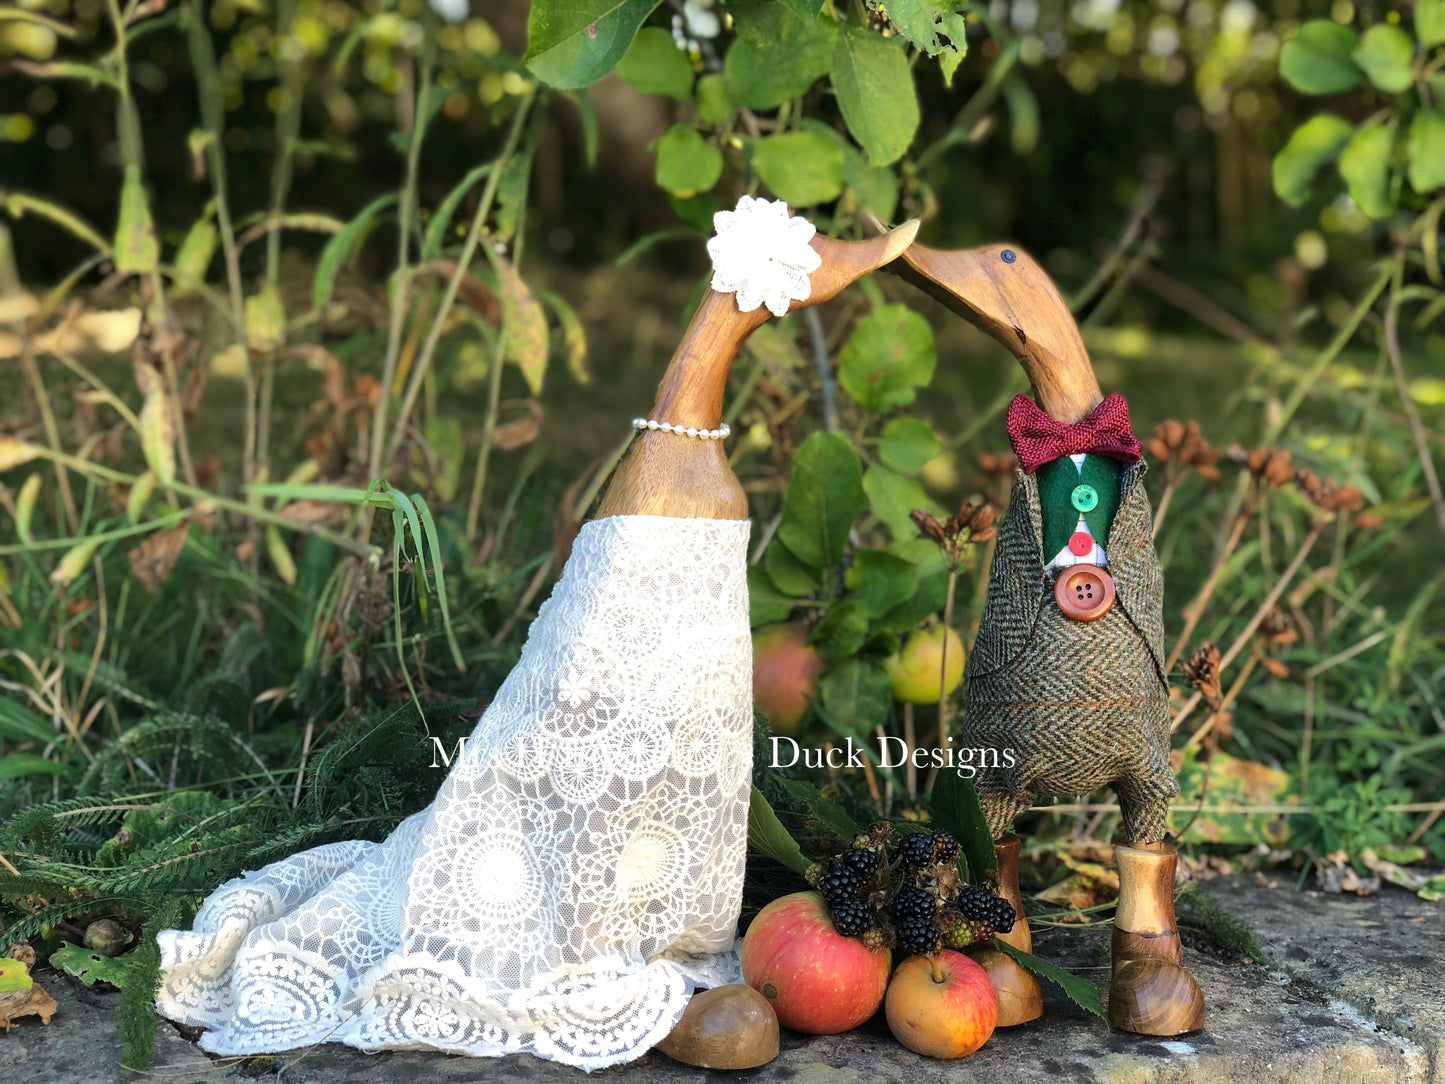 Bridal Couple - Vintage Style Wedding Pair - Navy Groom - Decorated Wooden Duck in Boots by Mrs H the Duck Lady